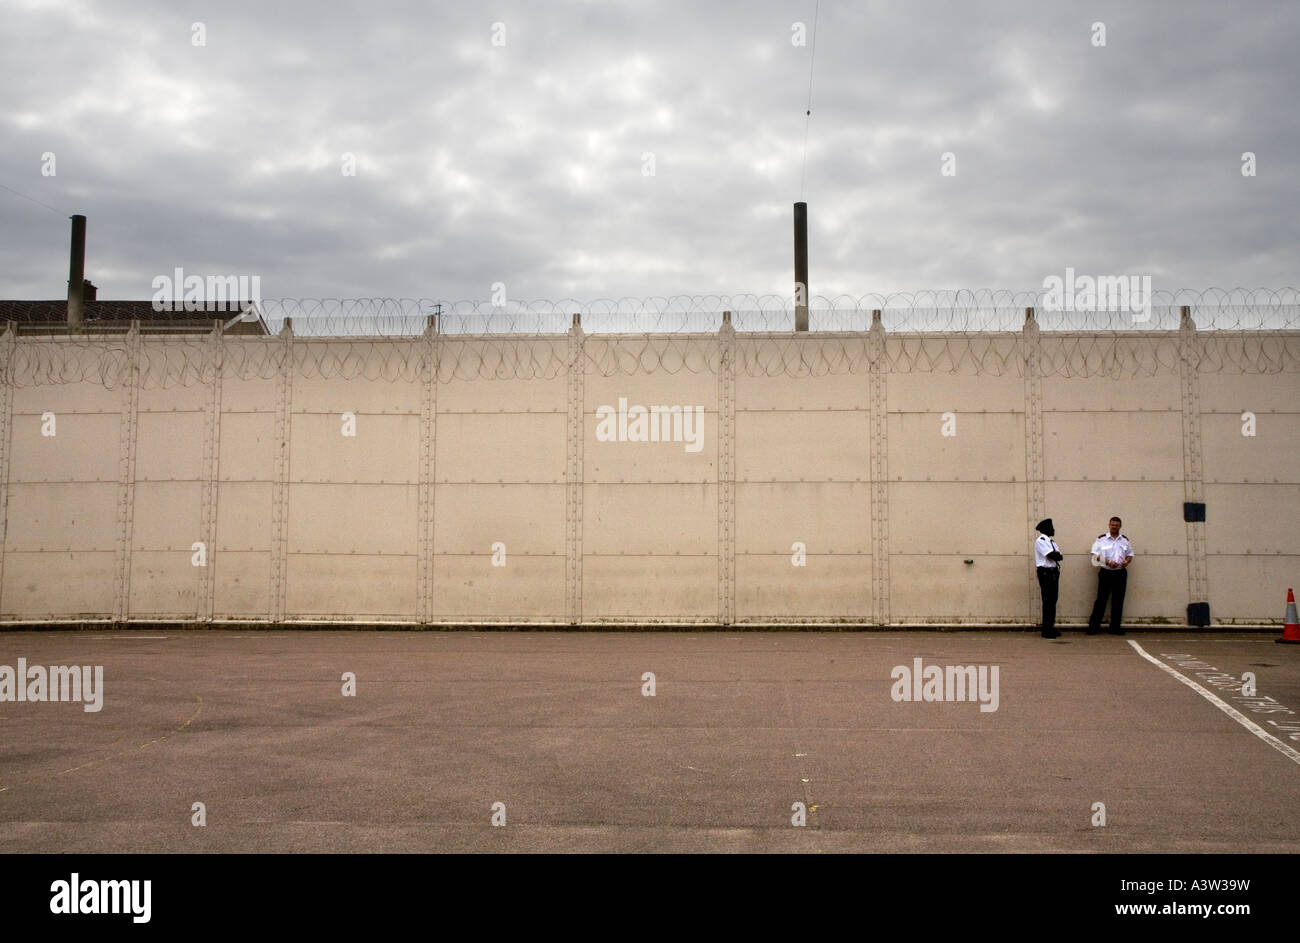 One of the perimeter walls in Wandsworth Prison. Wandsworth Prison is one of the largest prisons in the UK Stock Photo